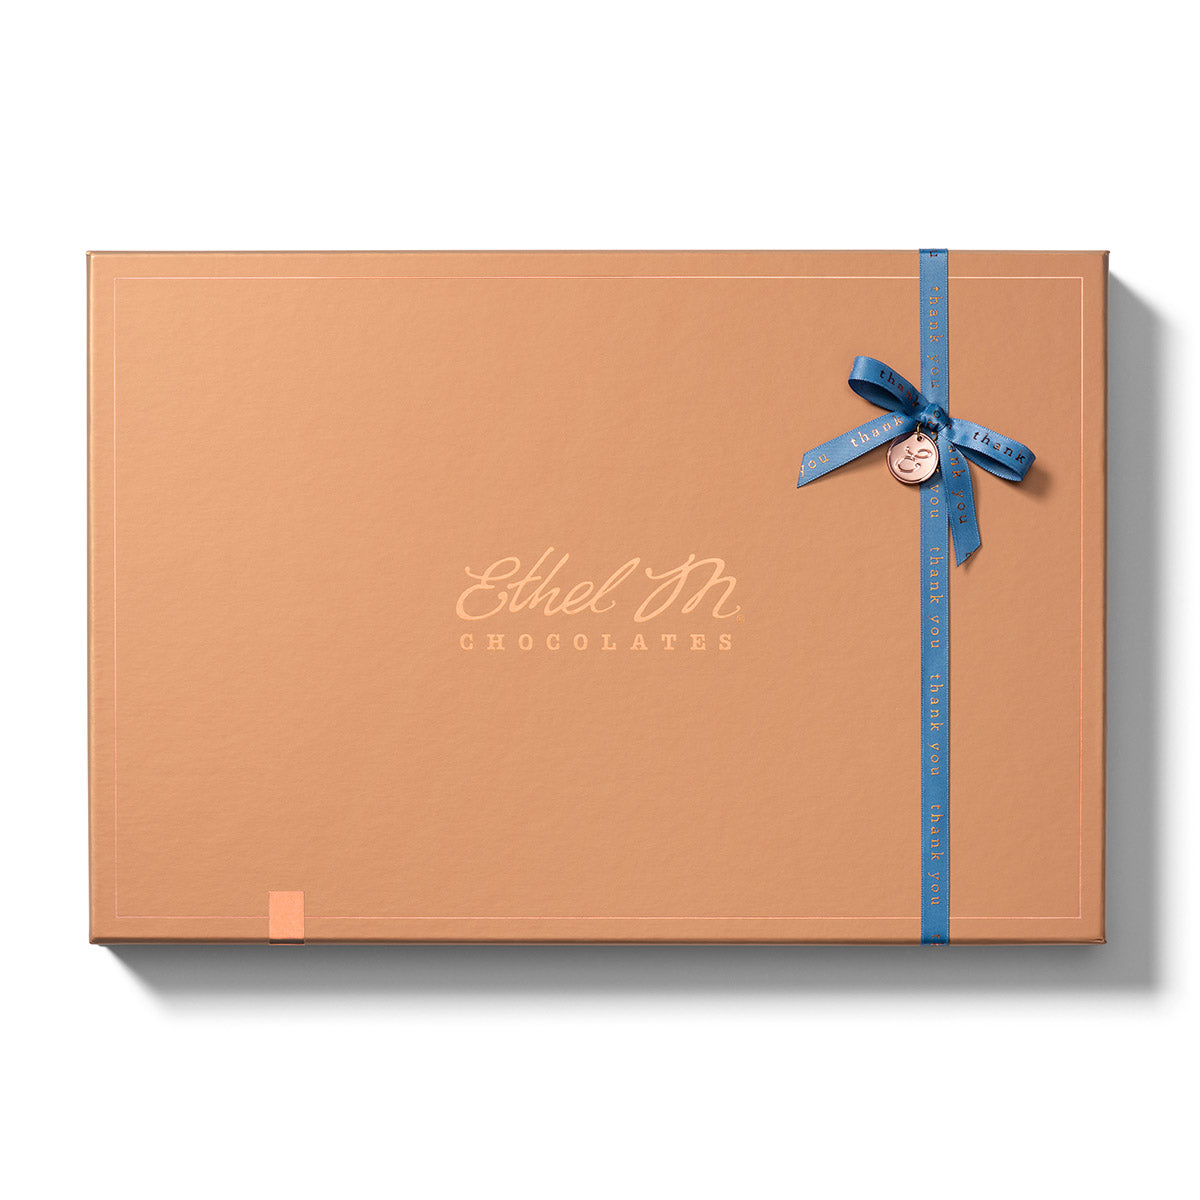 Ethel M Chocolates 40-piece Copper Box with Thank You Ribbon Custom Collection - Hero Image